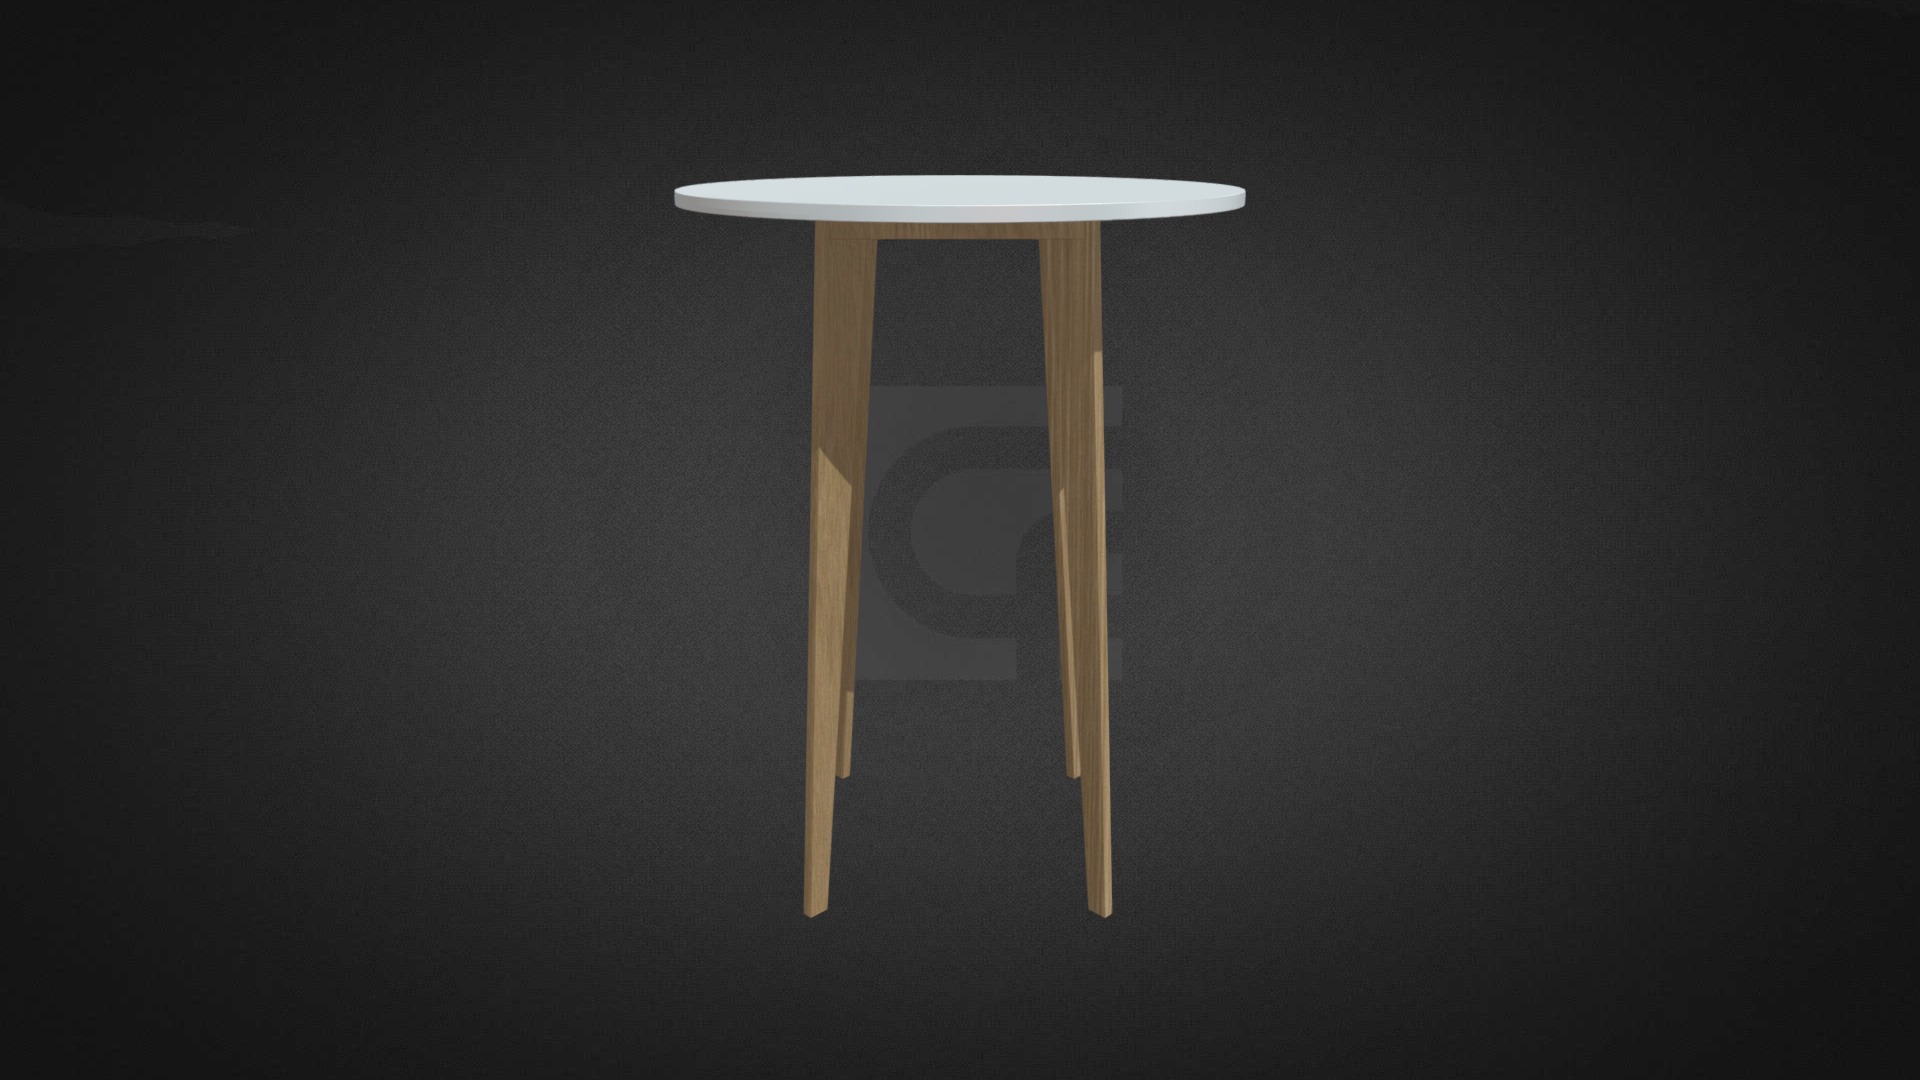 3D model Stefano High Table Hire - This is a 3D model of the Stefano High Table Hire. The 3D model is about a wooden table with a metal frame.